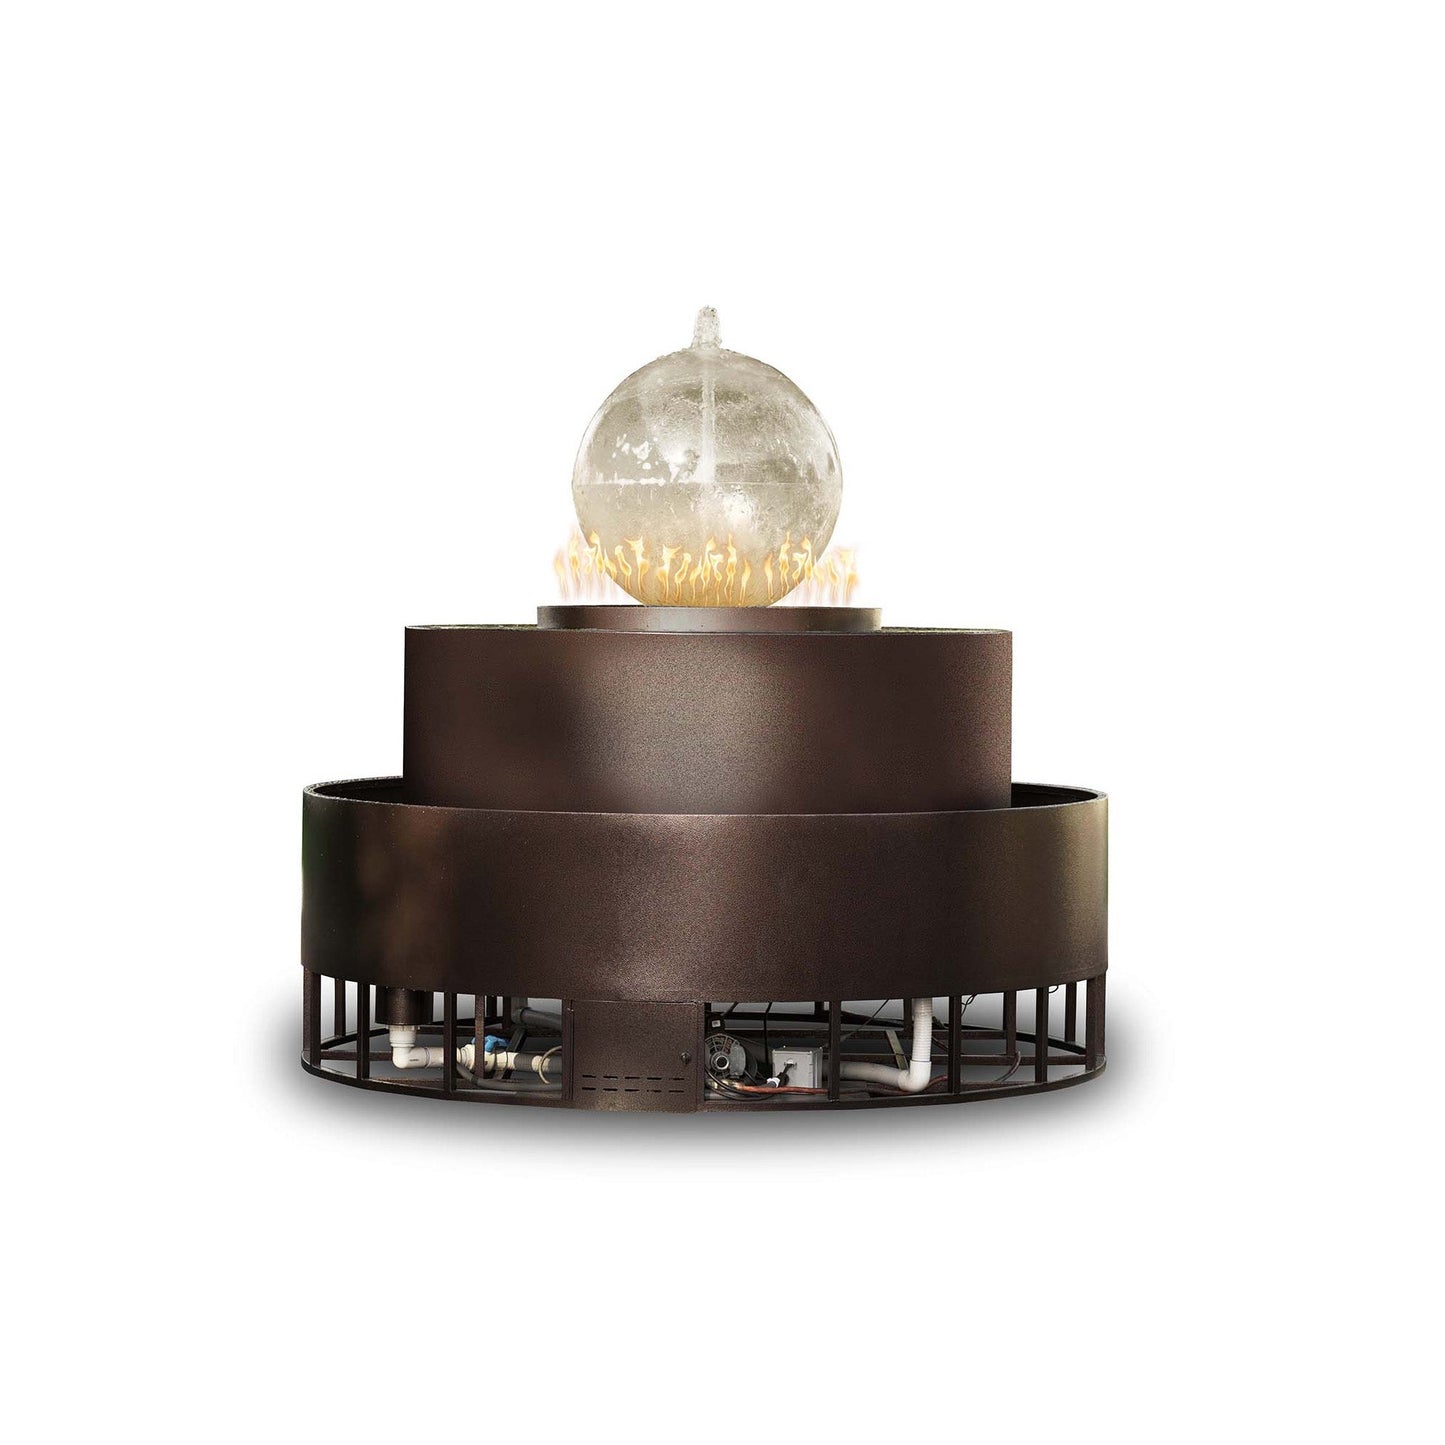 The Outdoor Plus Round Atlas 89" Java Powder Coated Liquid Propane Fire & Water Fountain with 12V Electronic Ignition